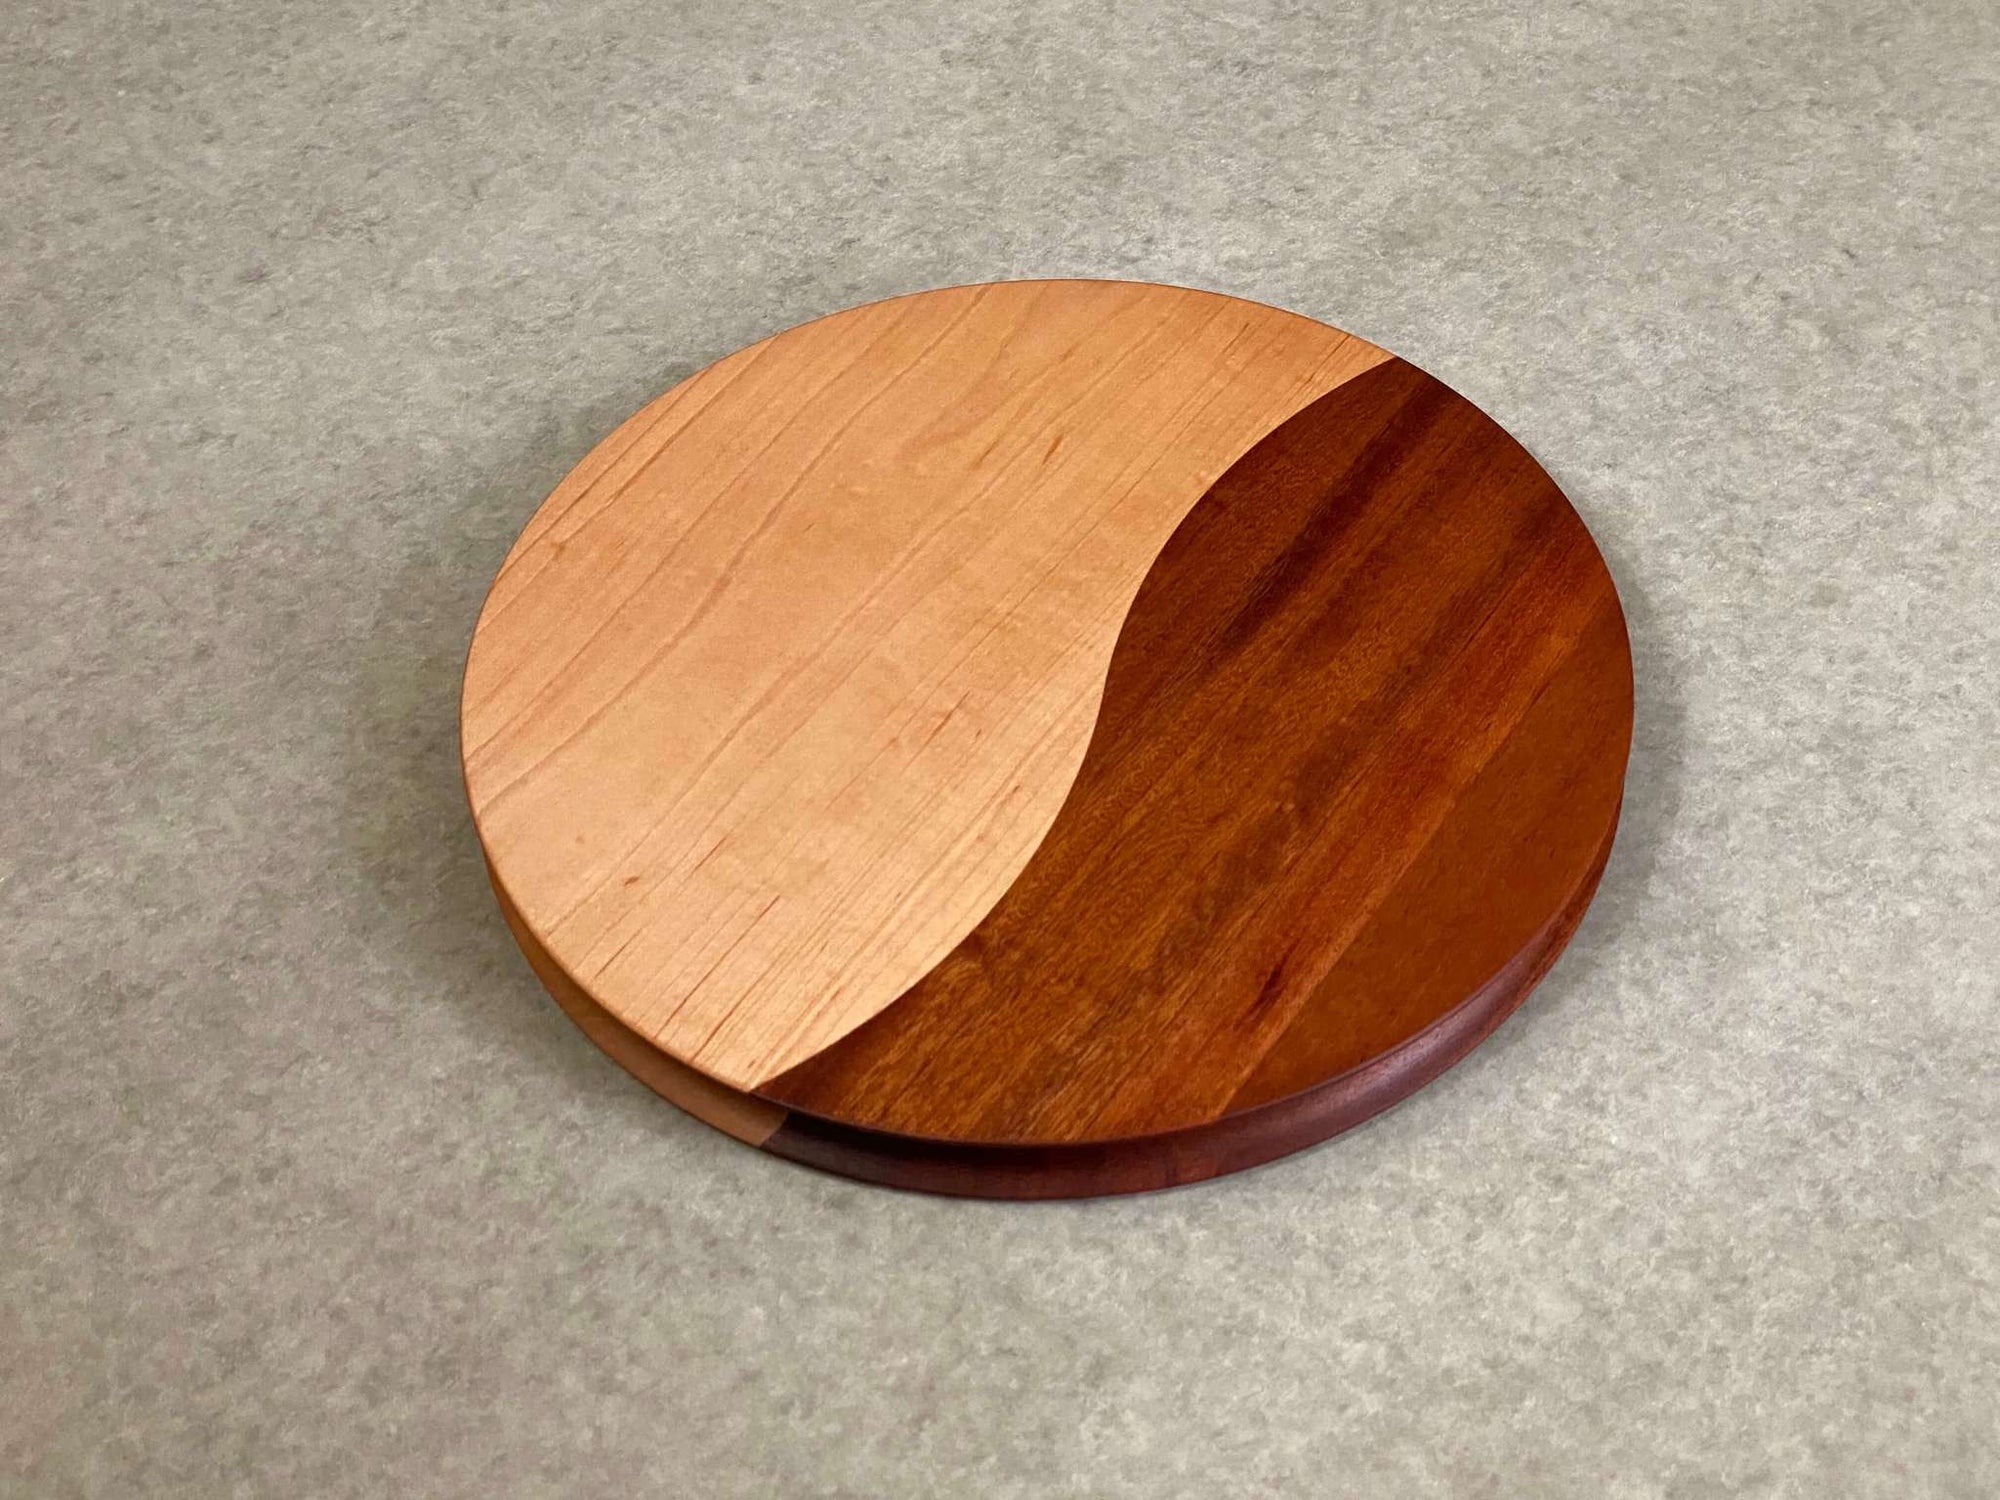 A round cutting and serving board made of part walnut and part mahogany with an off center curving joint. Sculpted edges provide a nice detail.